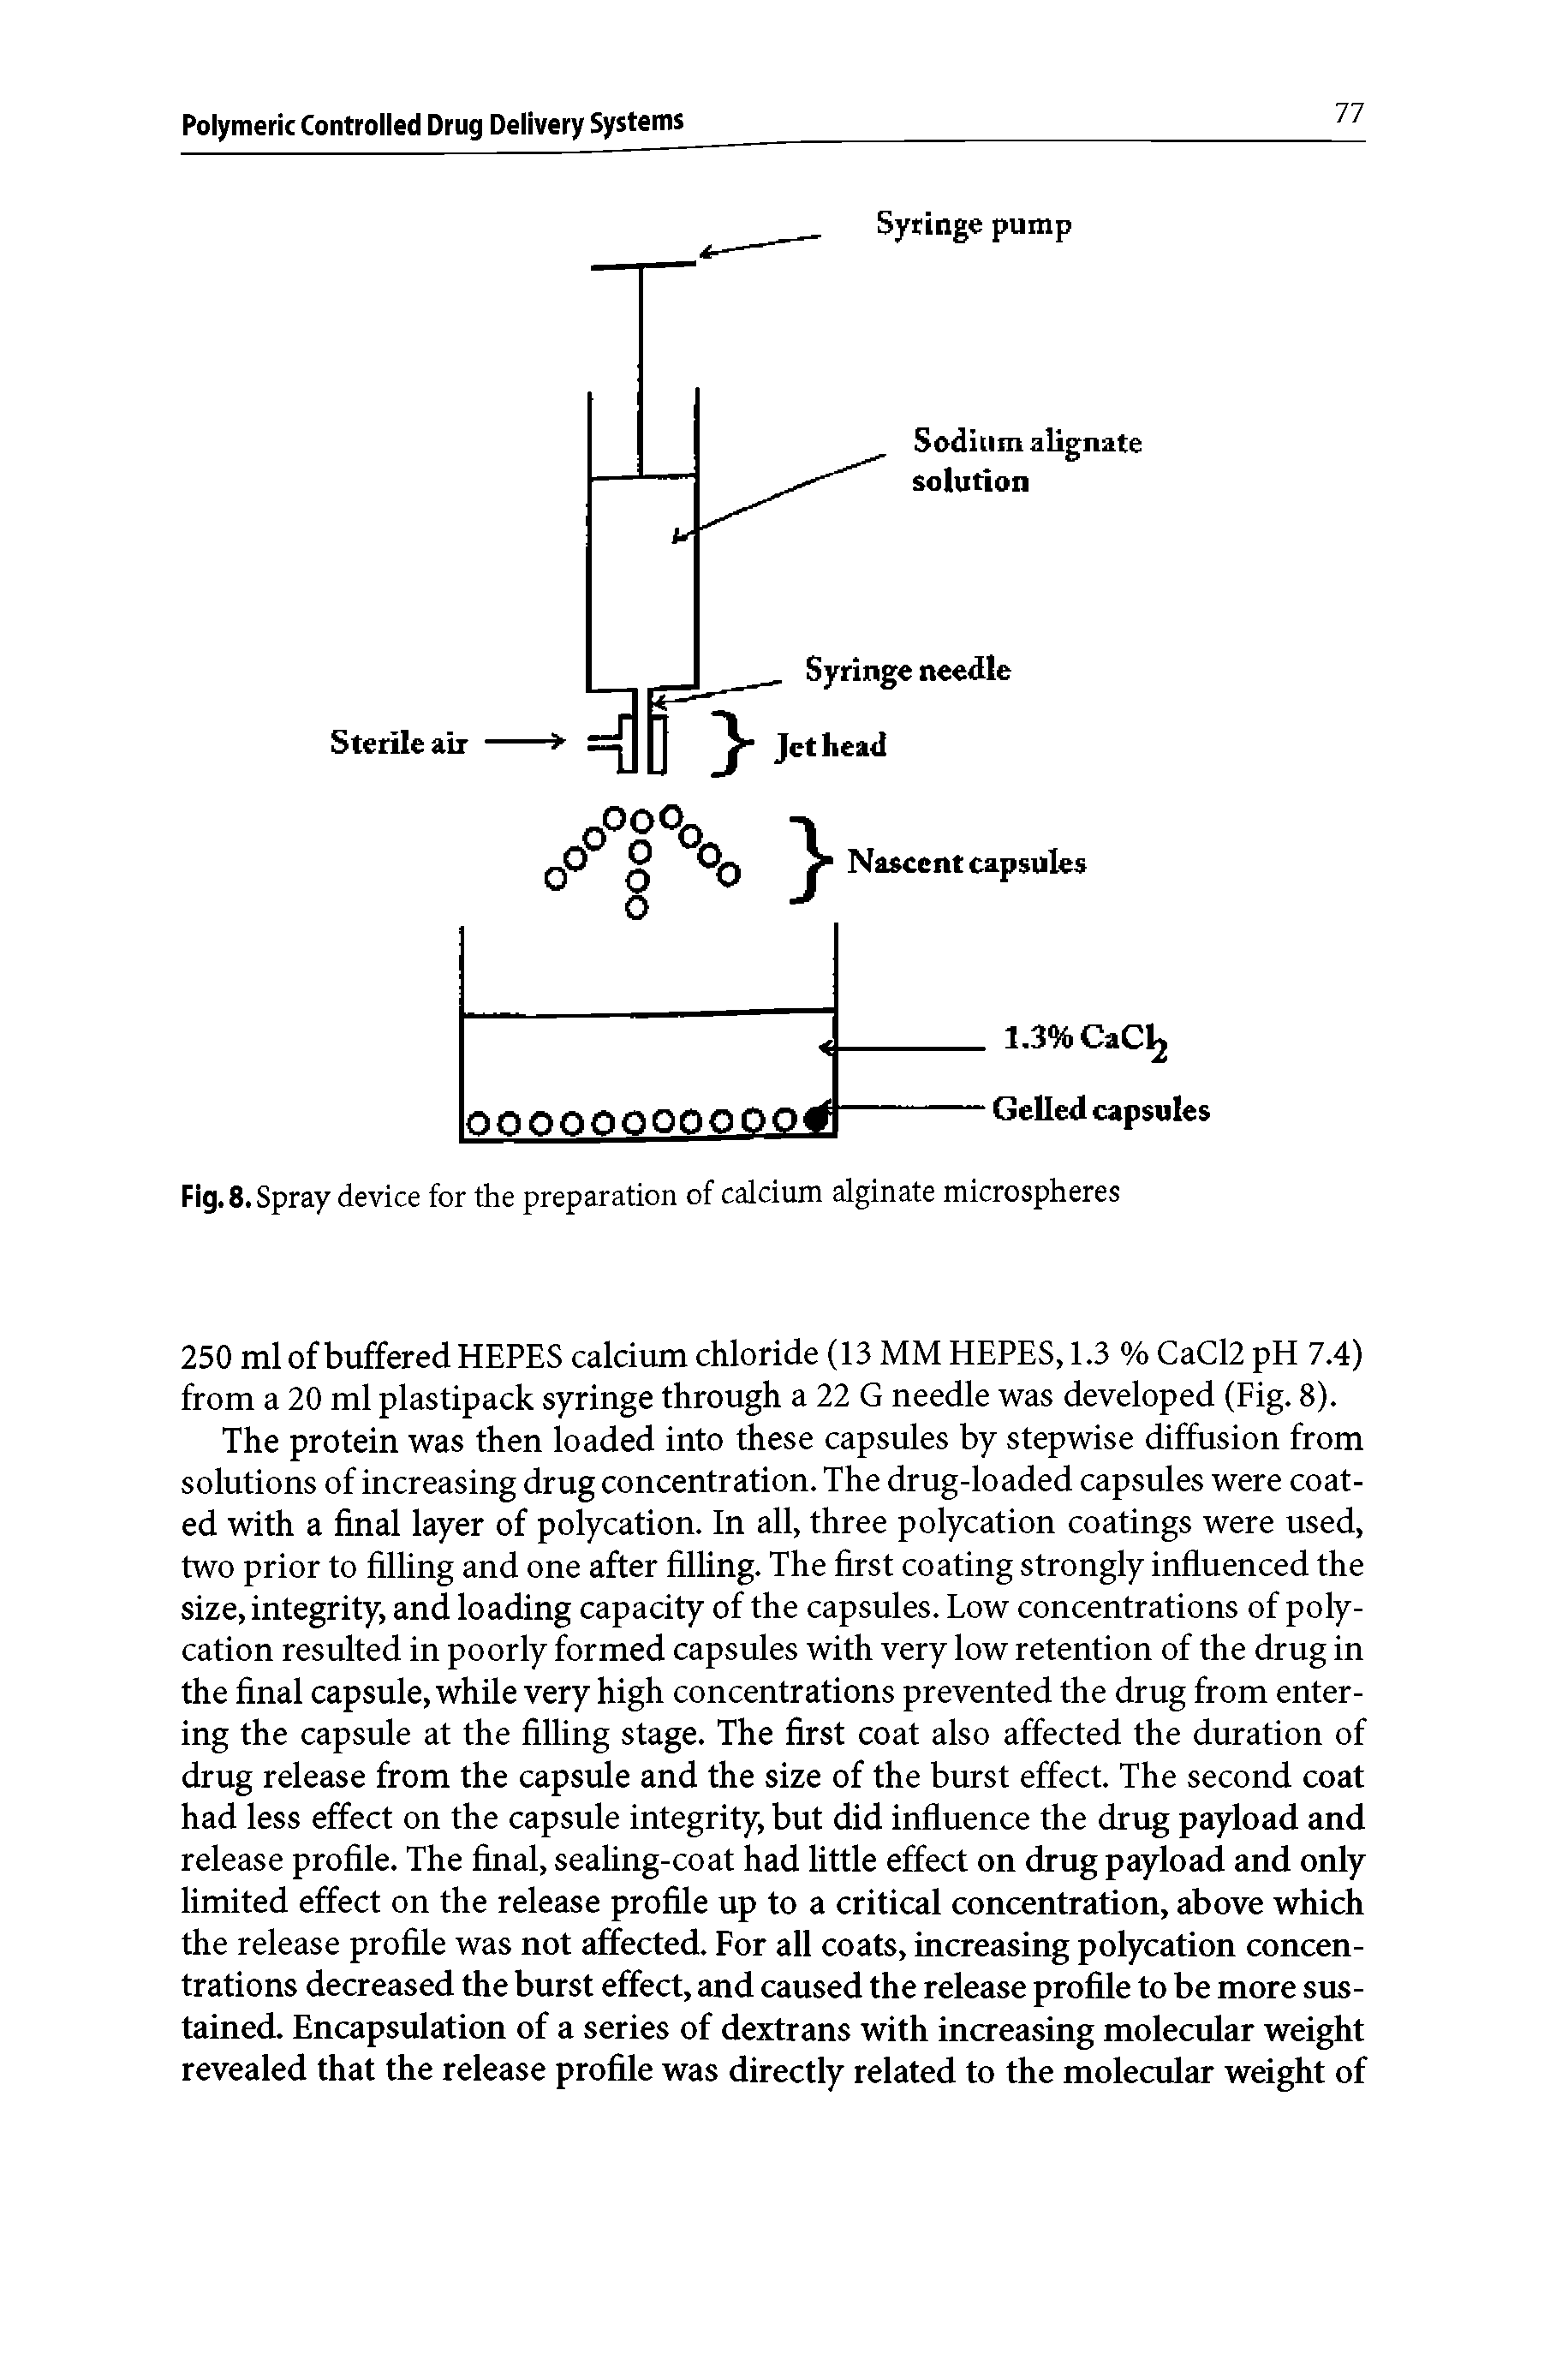 Fig. 8. Spray device for the preparation of calcium alginate microspheres...